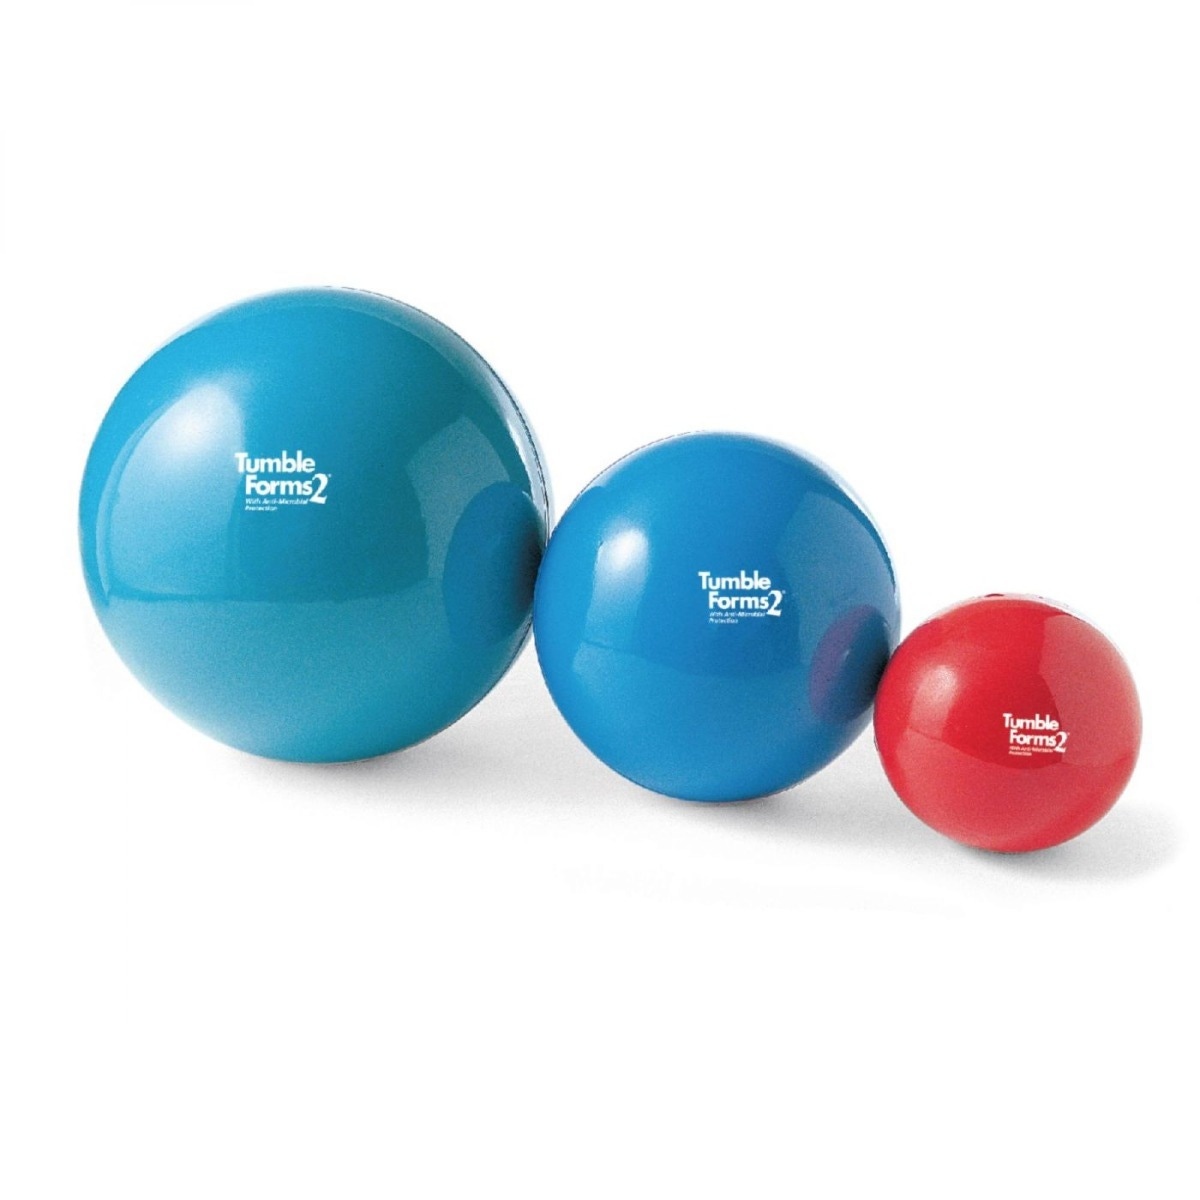 Three different colored balance balls, shown largest to smallest from left to right